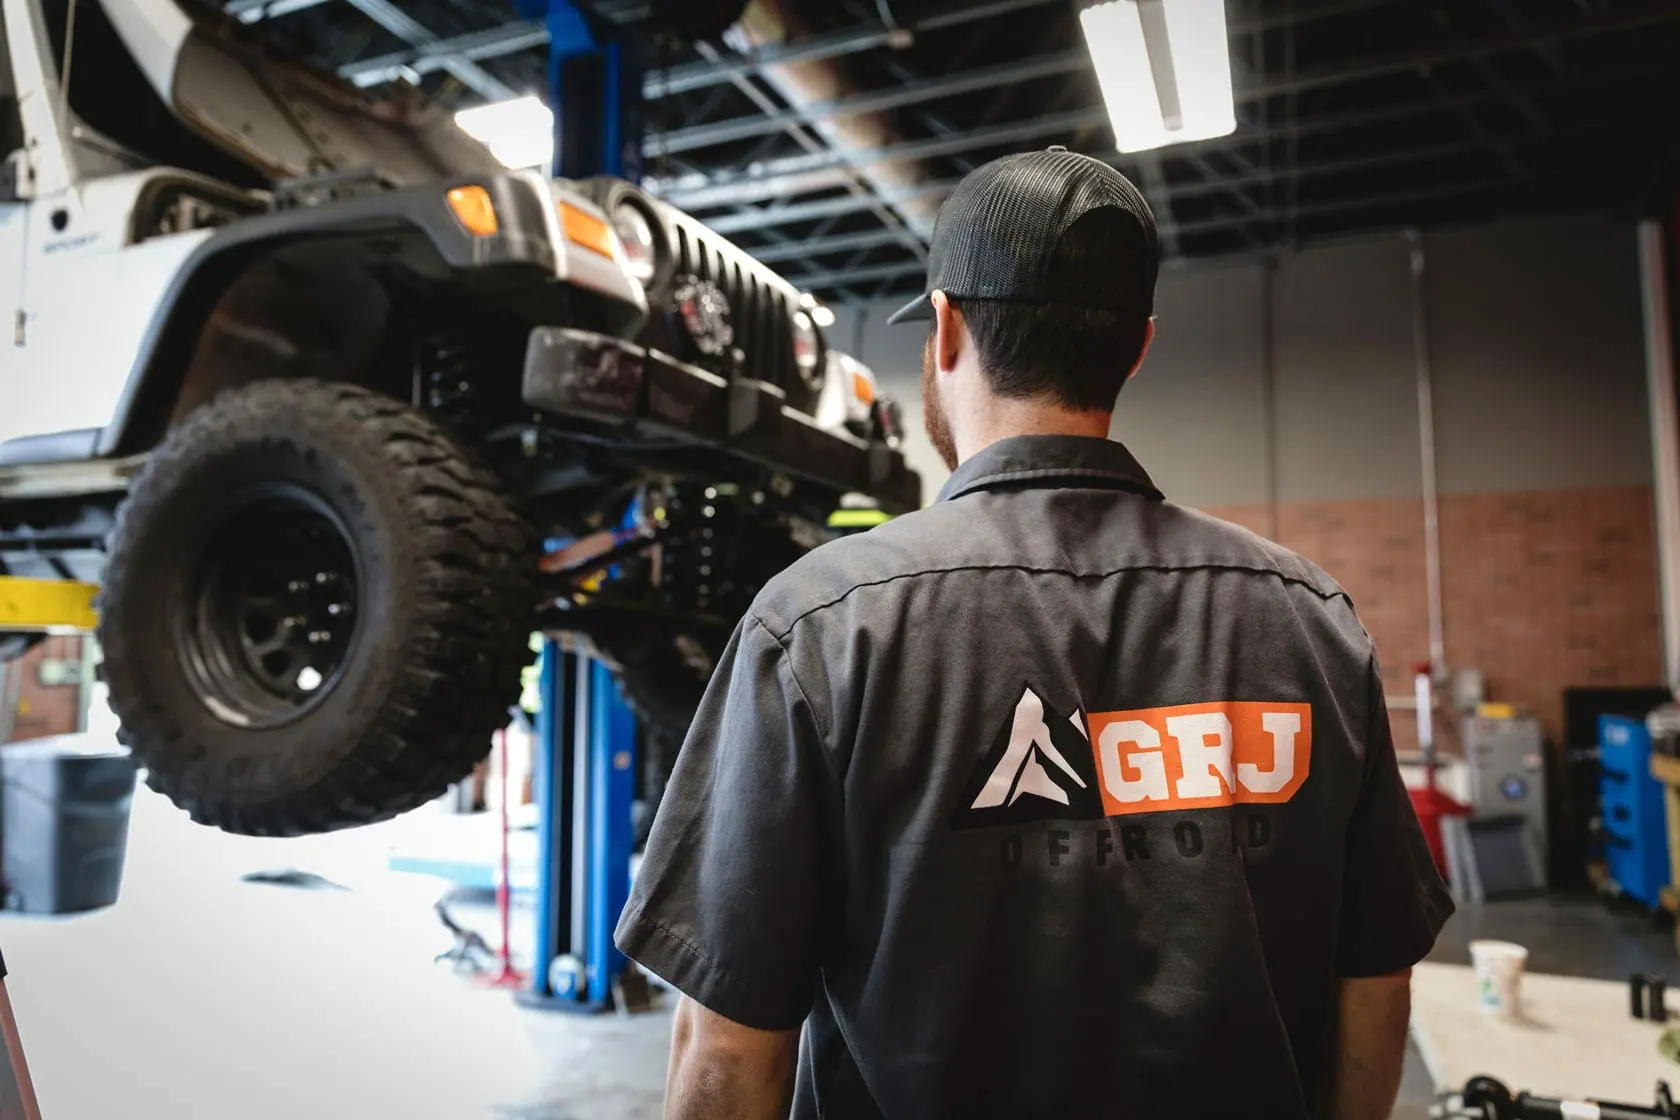 GRJ Offroad: Lift Kits, Accessories, Tires, & More for Jeeps, Trucks, & SUV